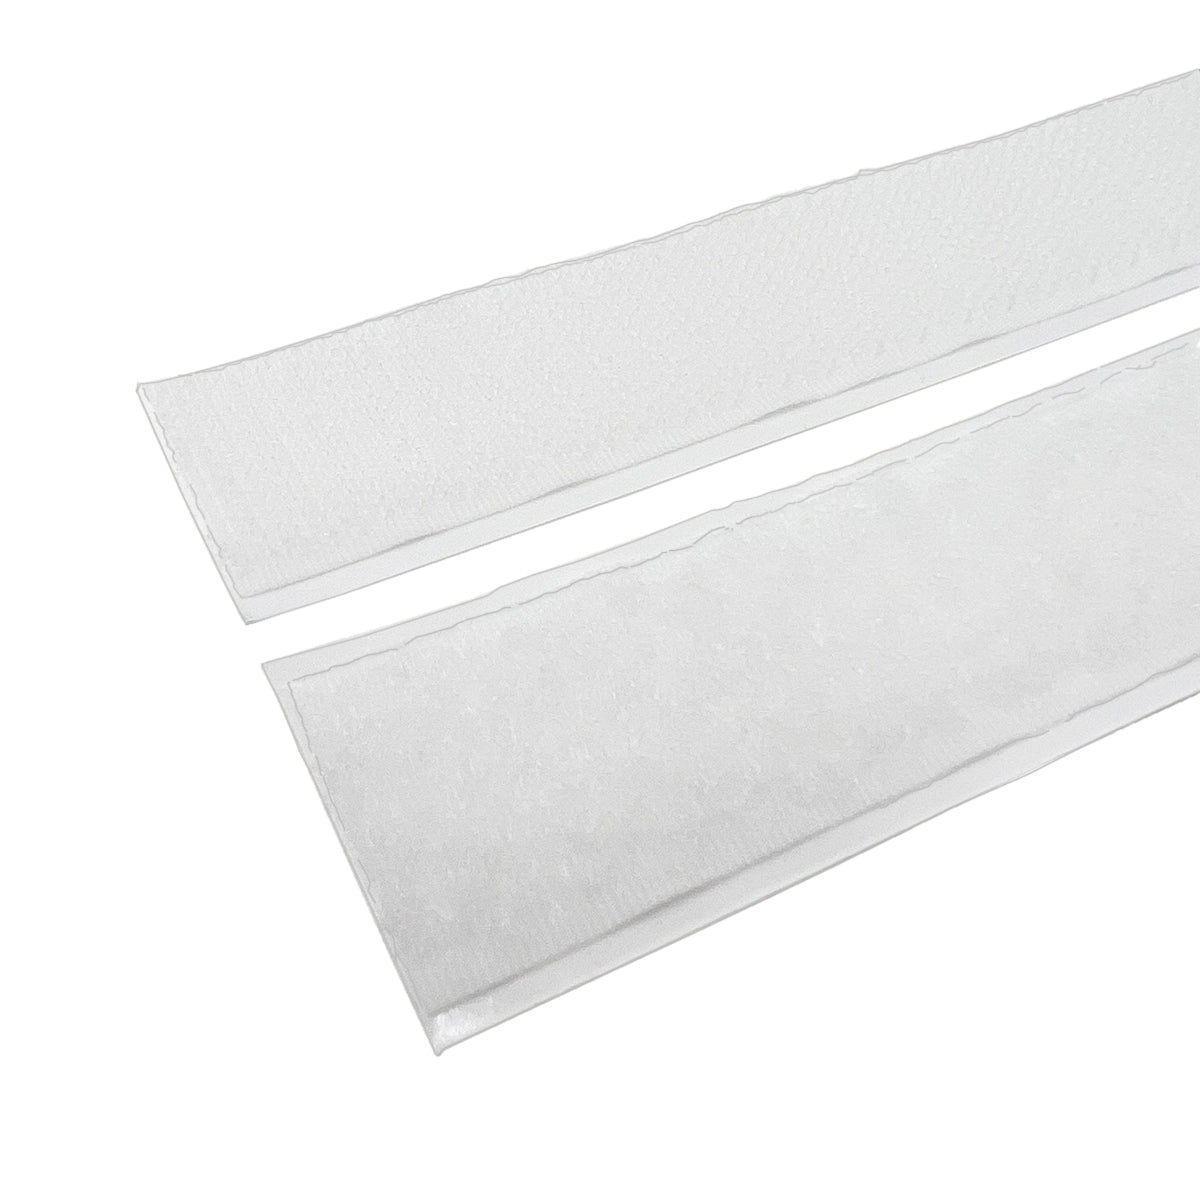 White Adhesive Velcro Hook and Loop 1 x 6